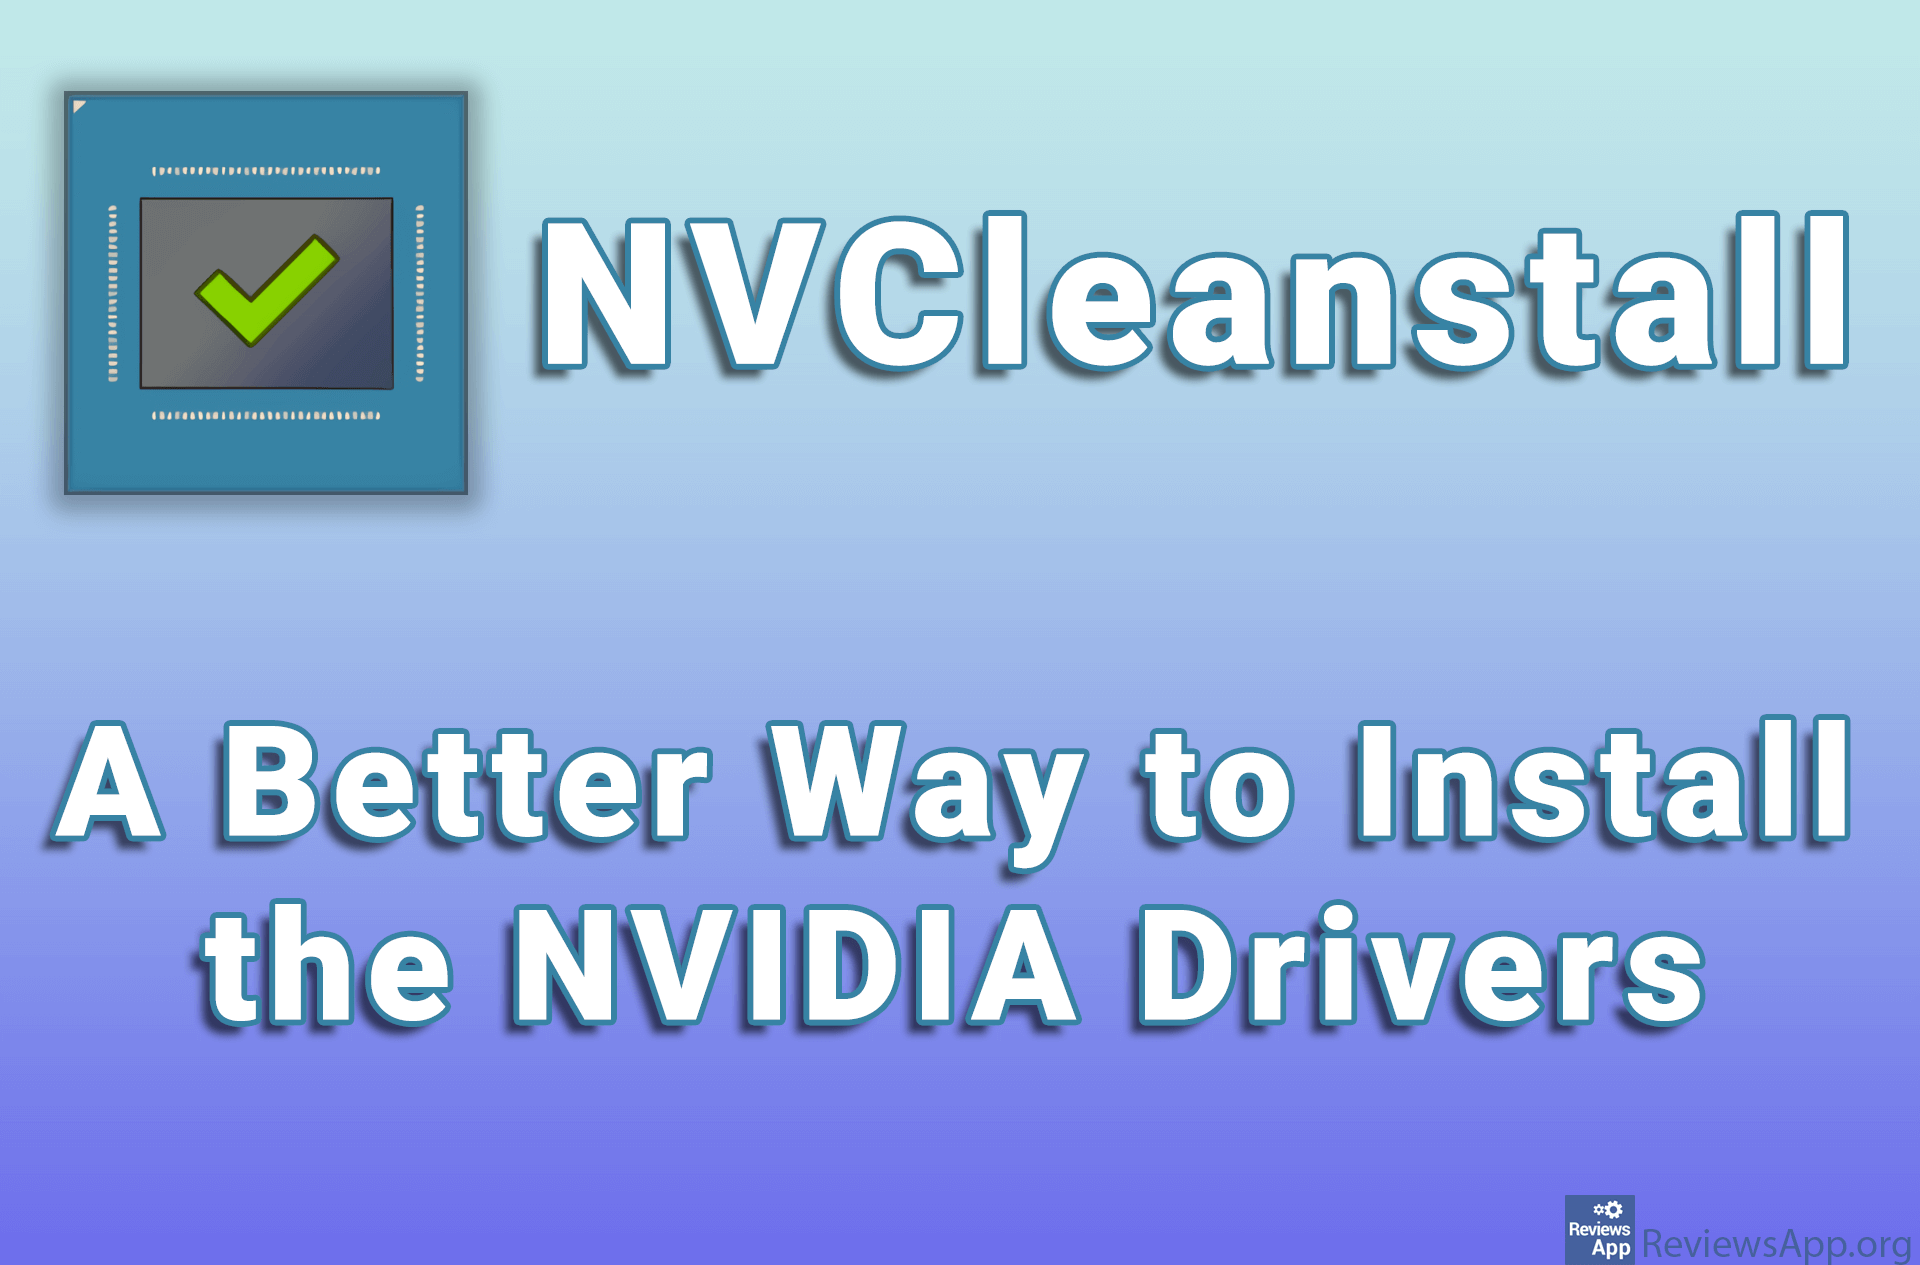 NVCleanstall – A Better Way to Install the NVIDIA Drivers